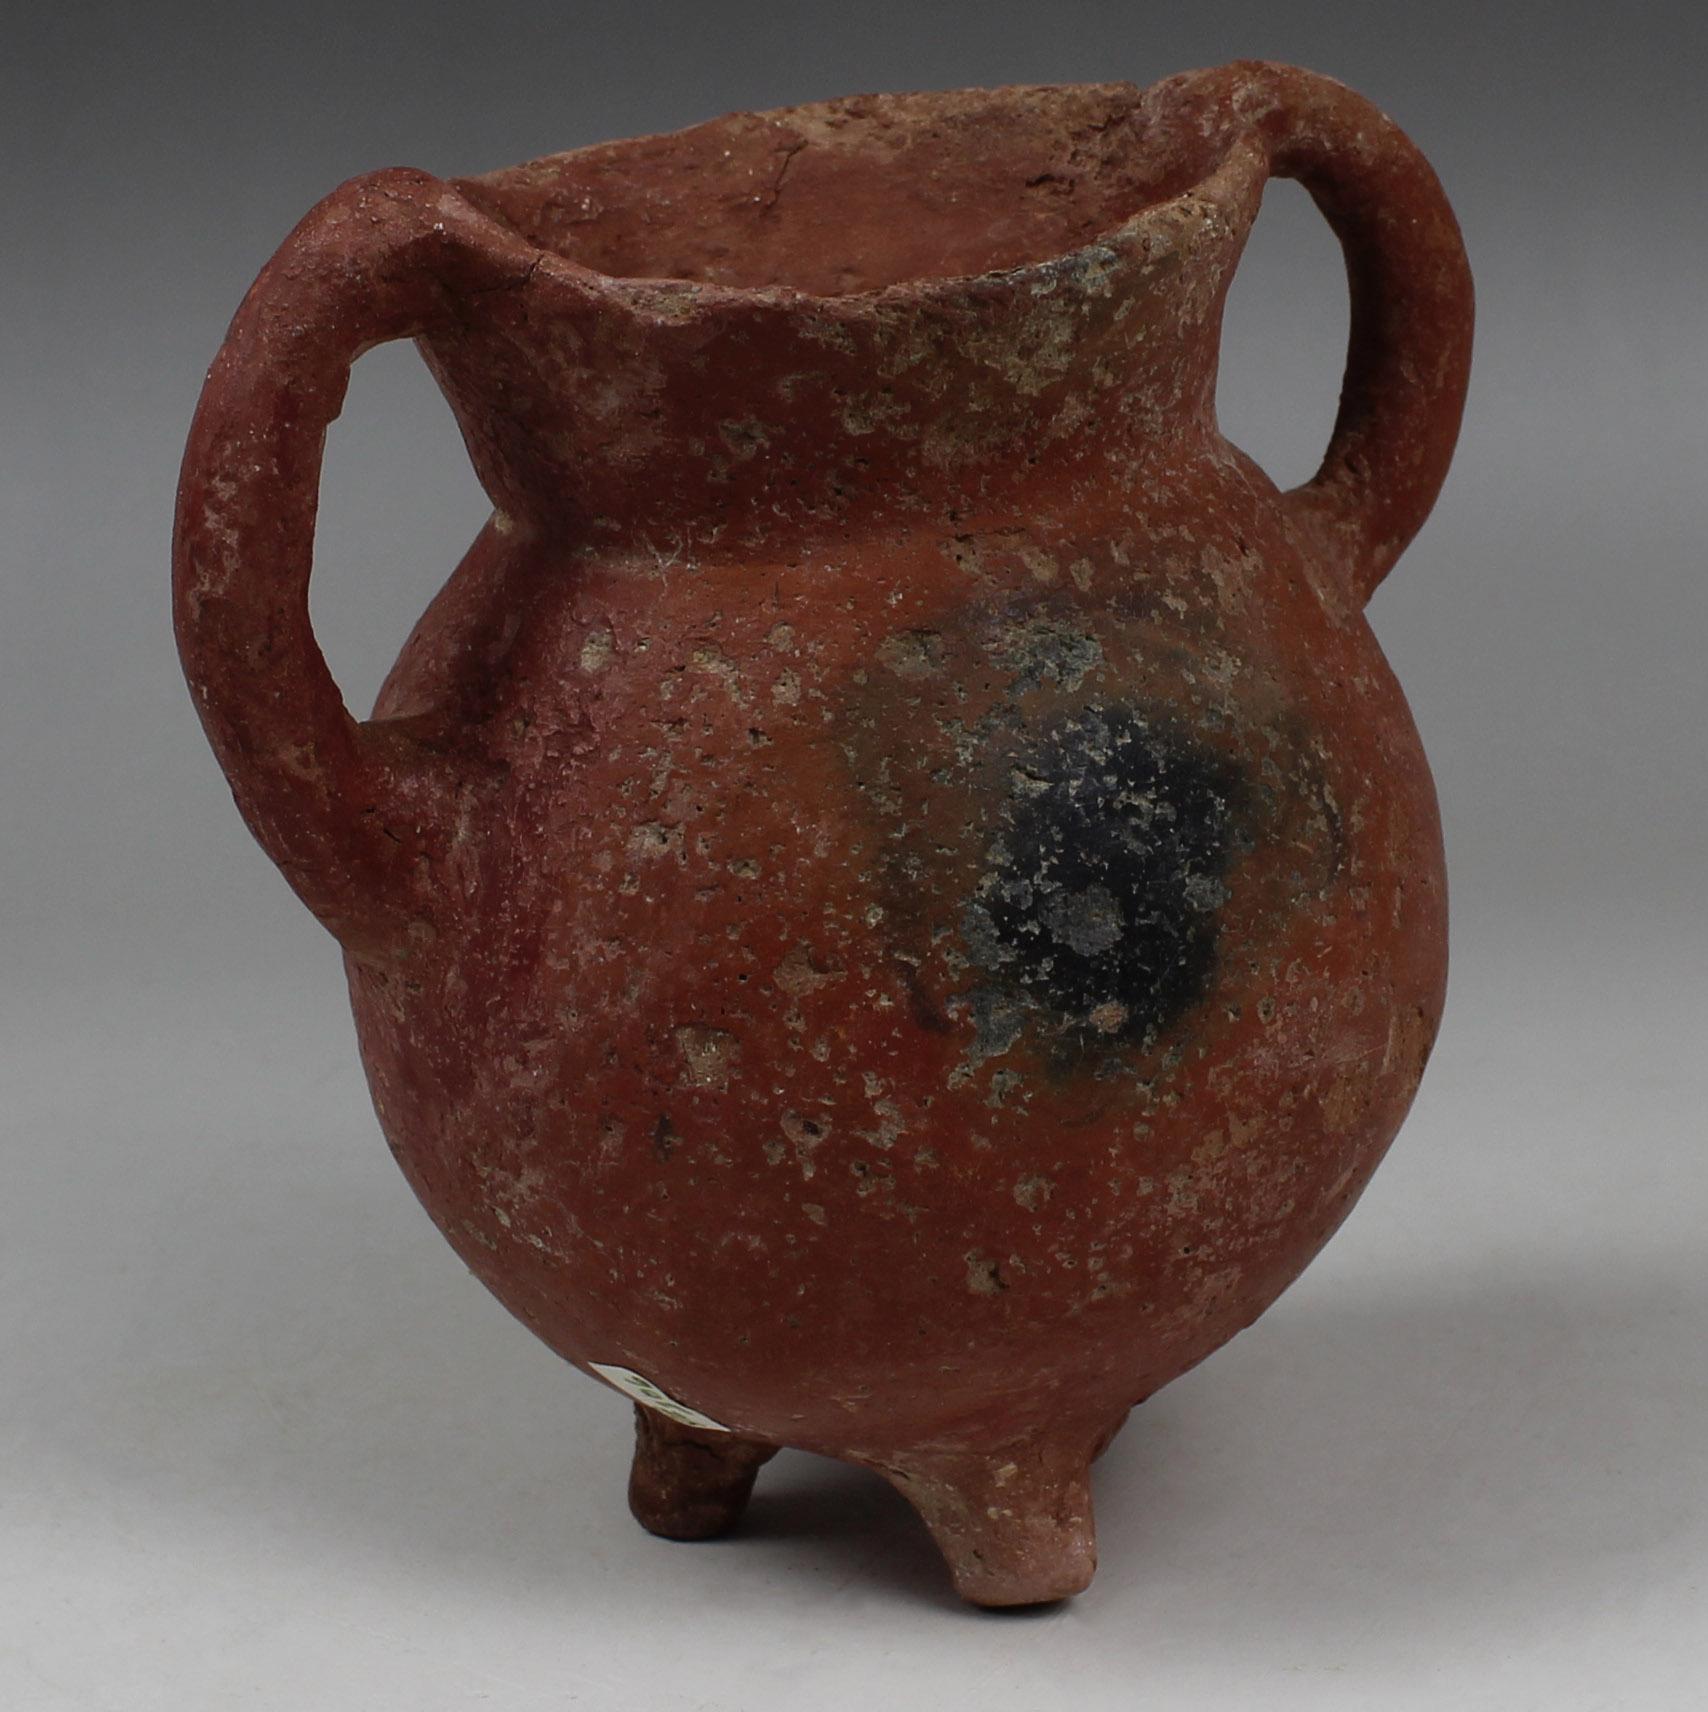 Cypriot Bronze Age tripod cooking pot